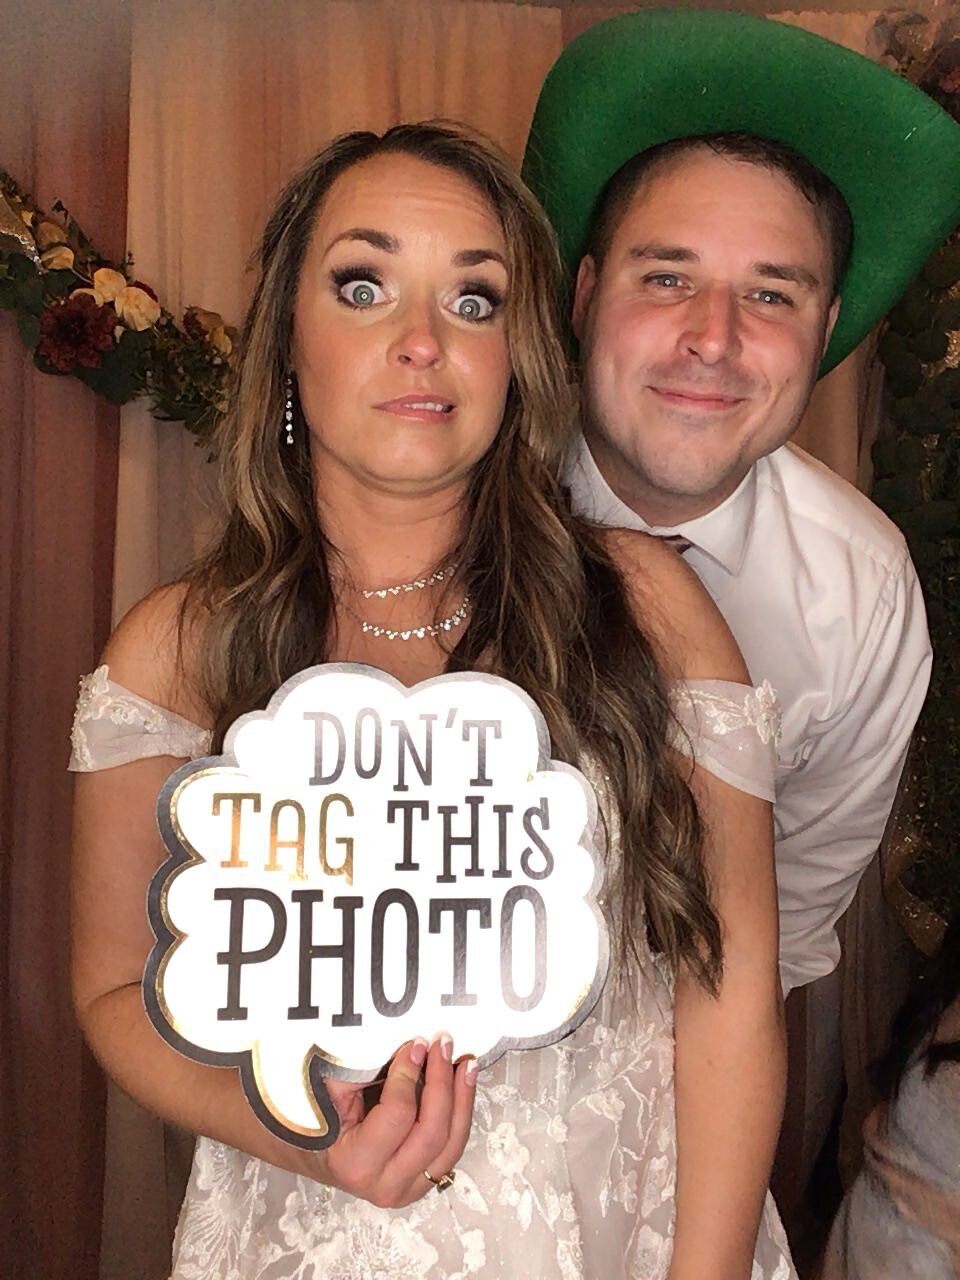 Bride with funny sign and friend